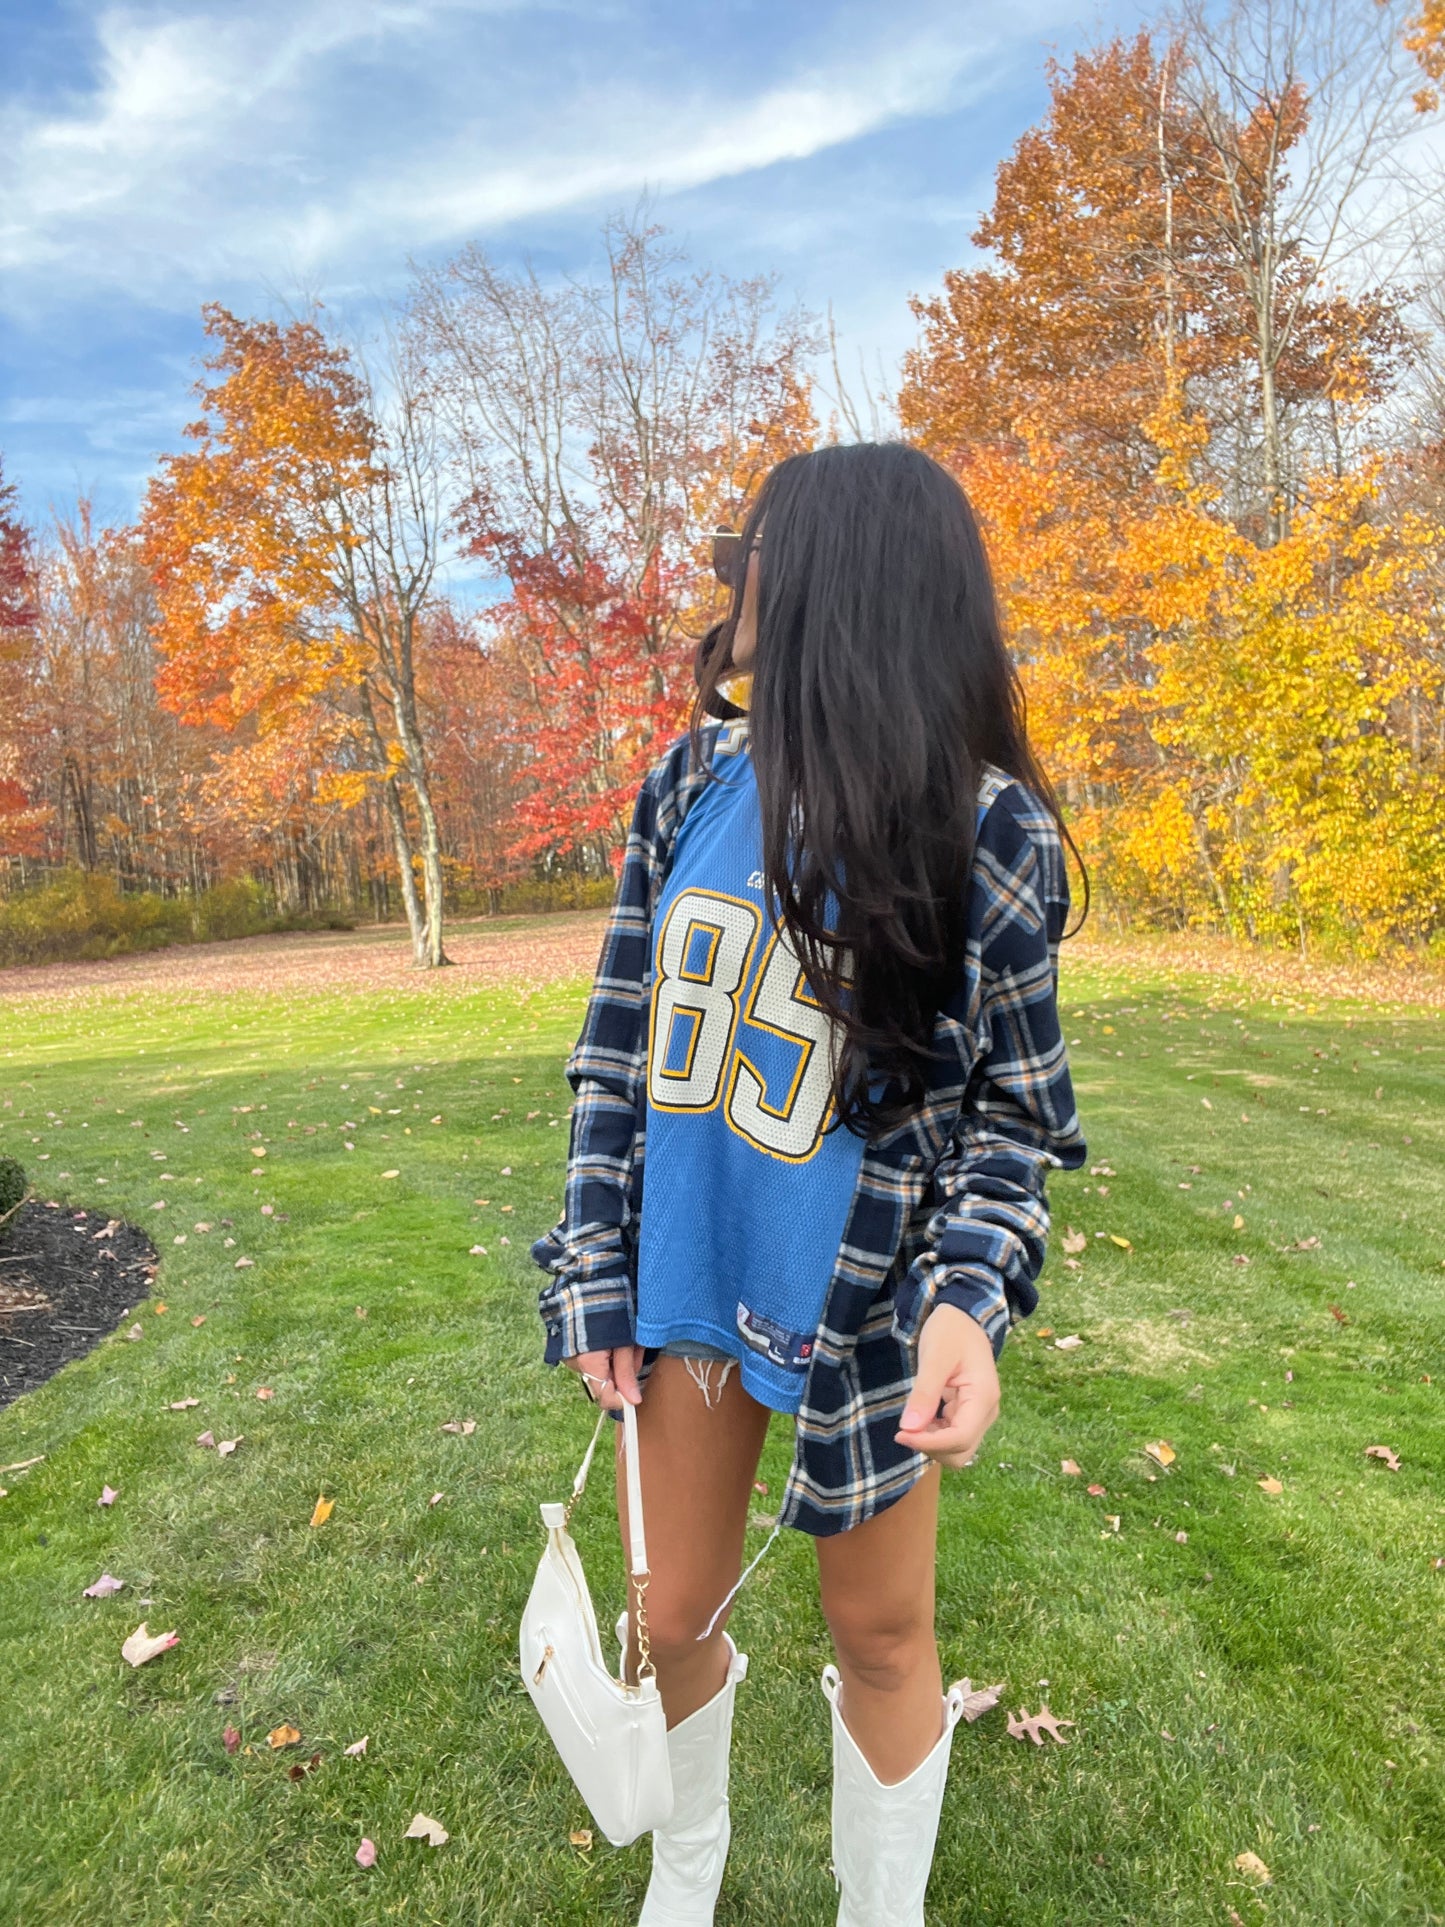 #85 GATES CHARGERS JERSEY X FLANNEL